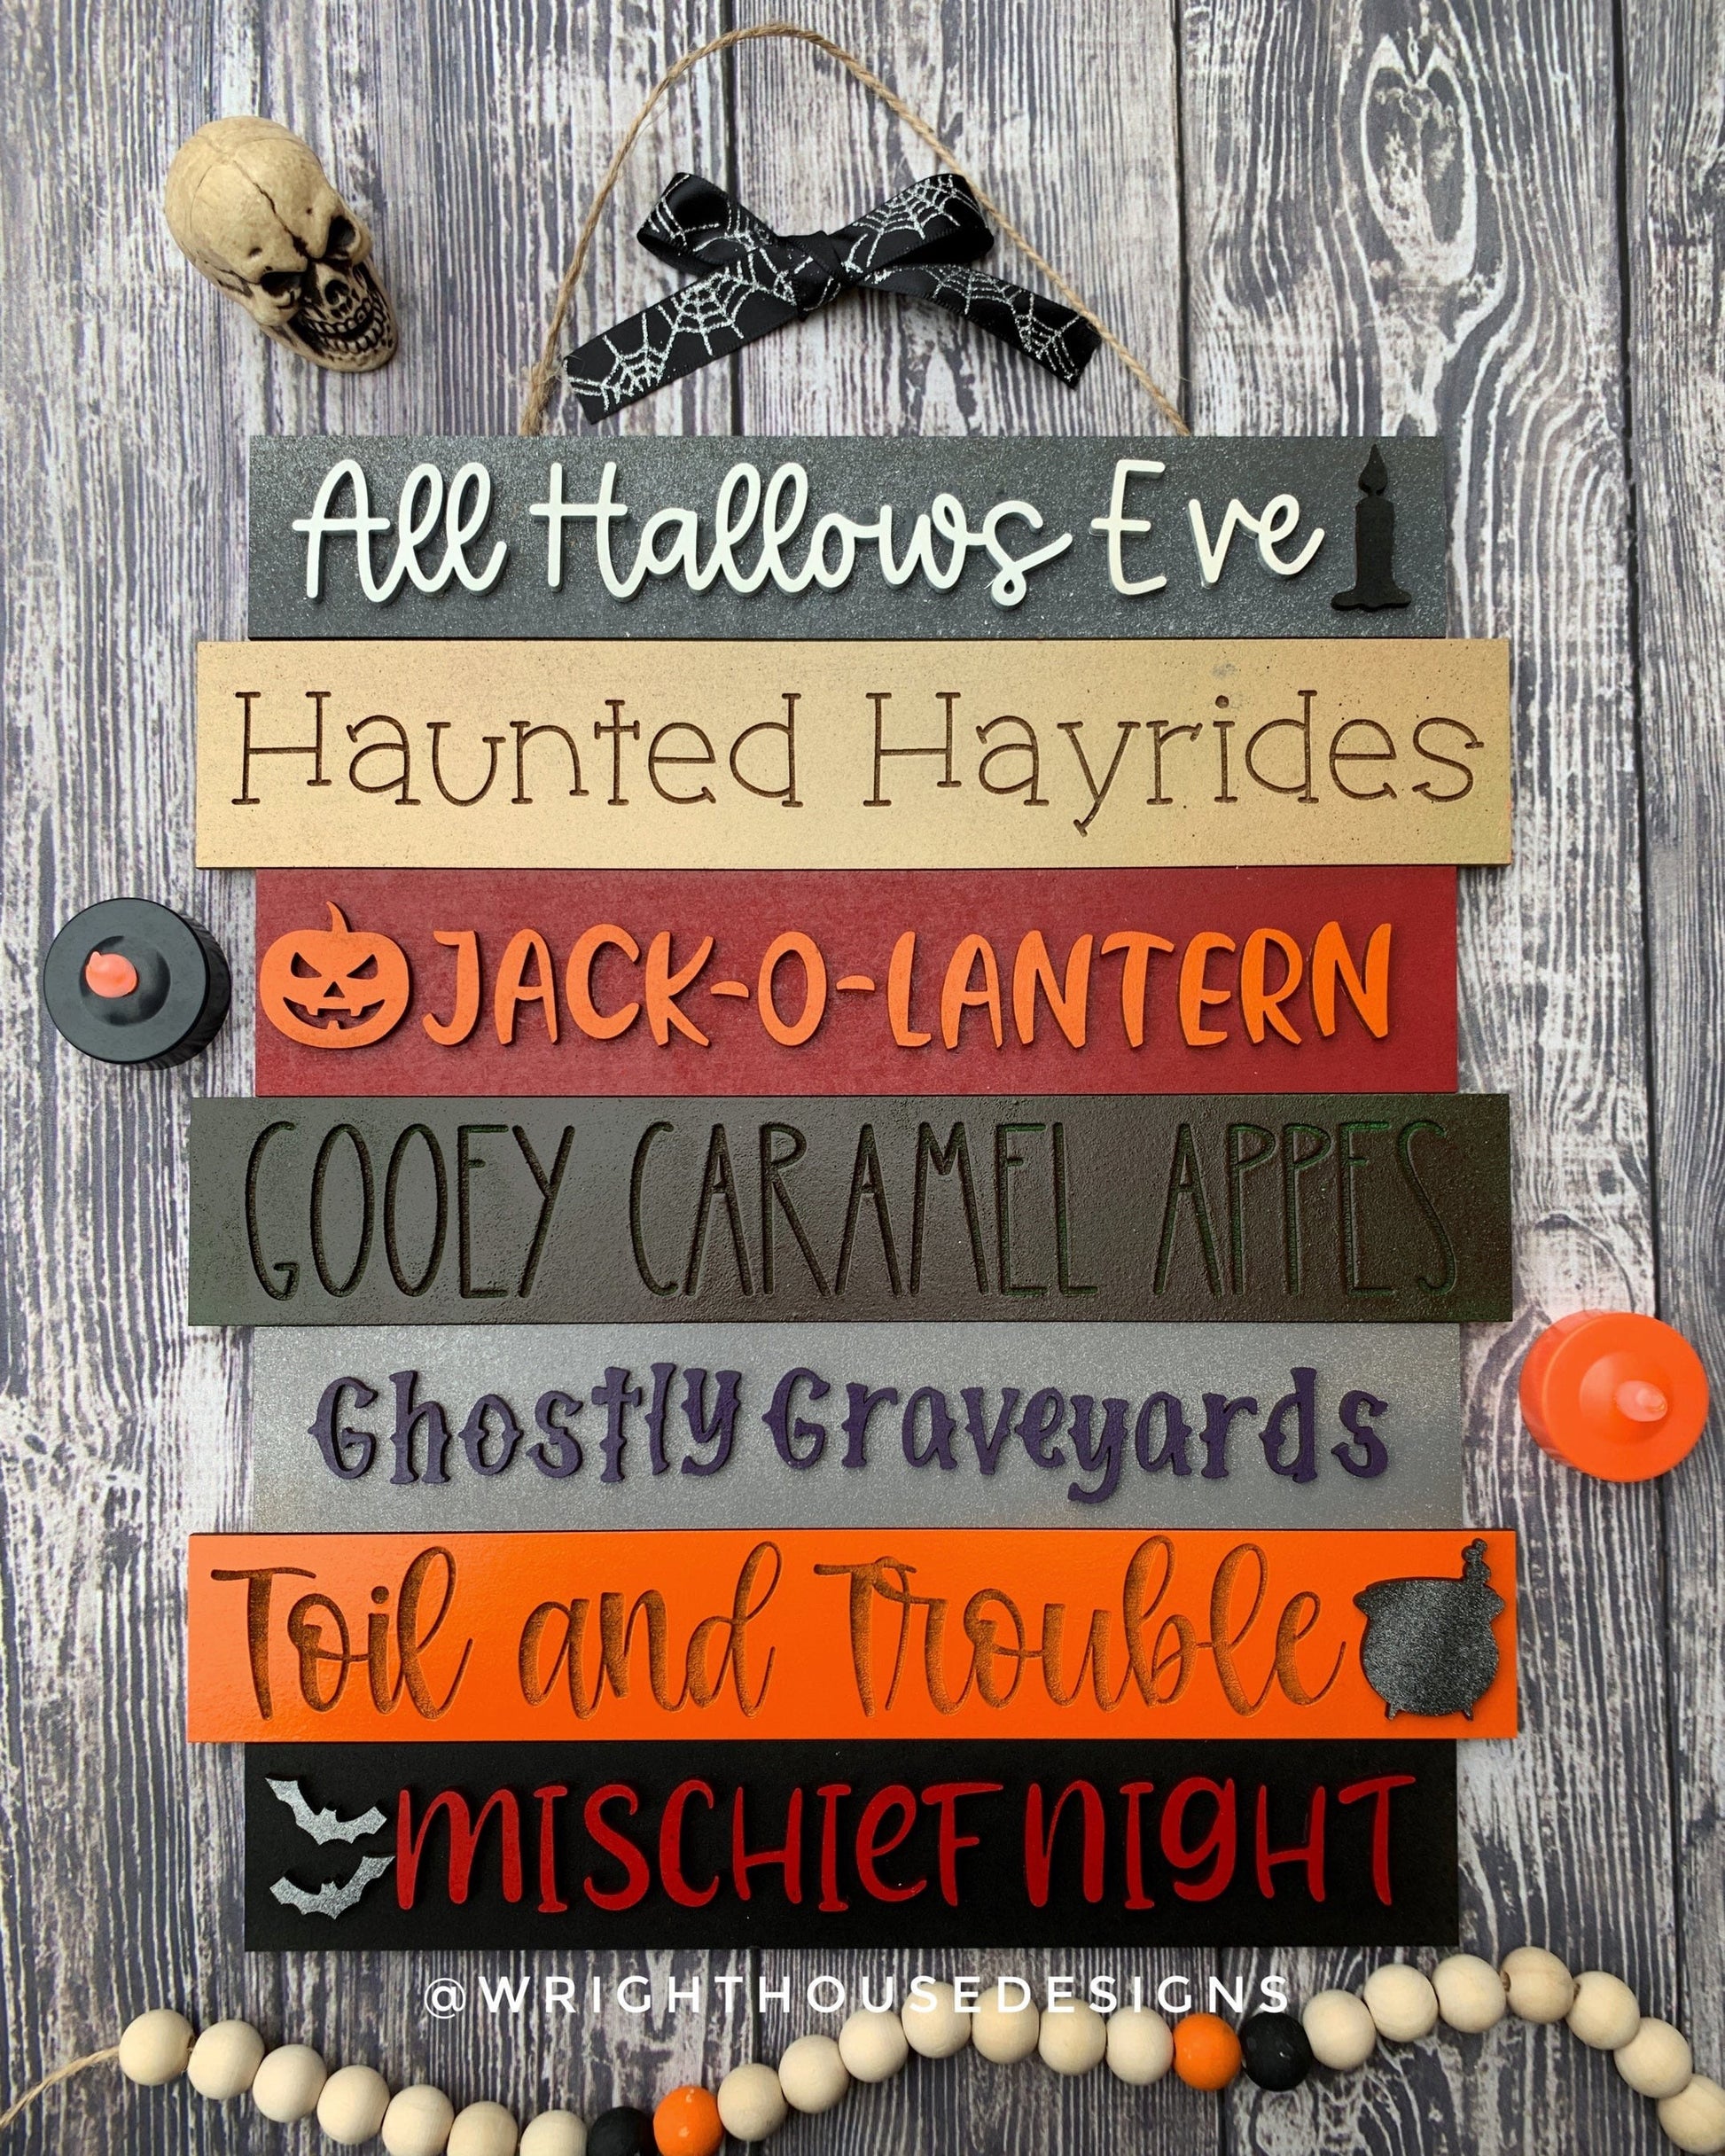 All Hallows Eve Halloween Bucket List Stacked Sign - Seasonal Wall Decor and DIY Kits - Cut File For Glowforge Lasers - Digital SVG File